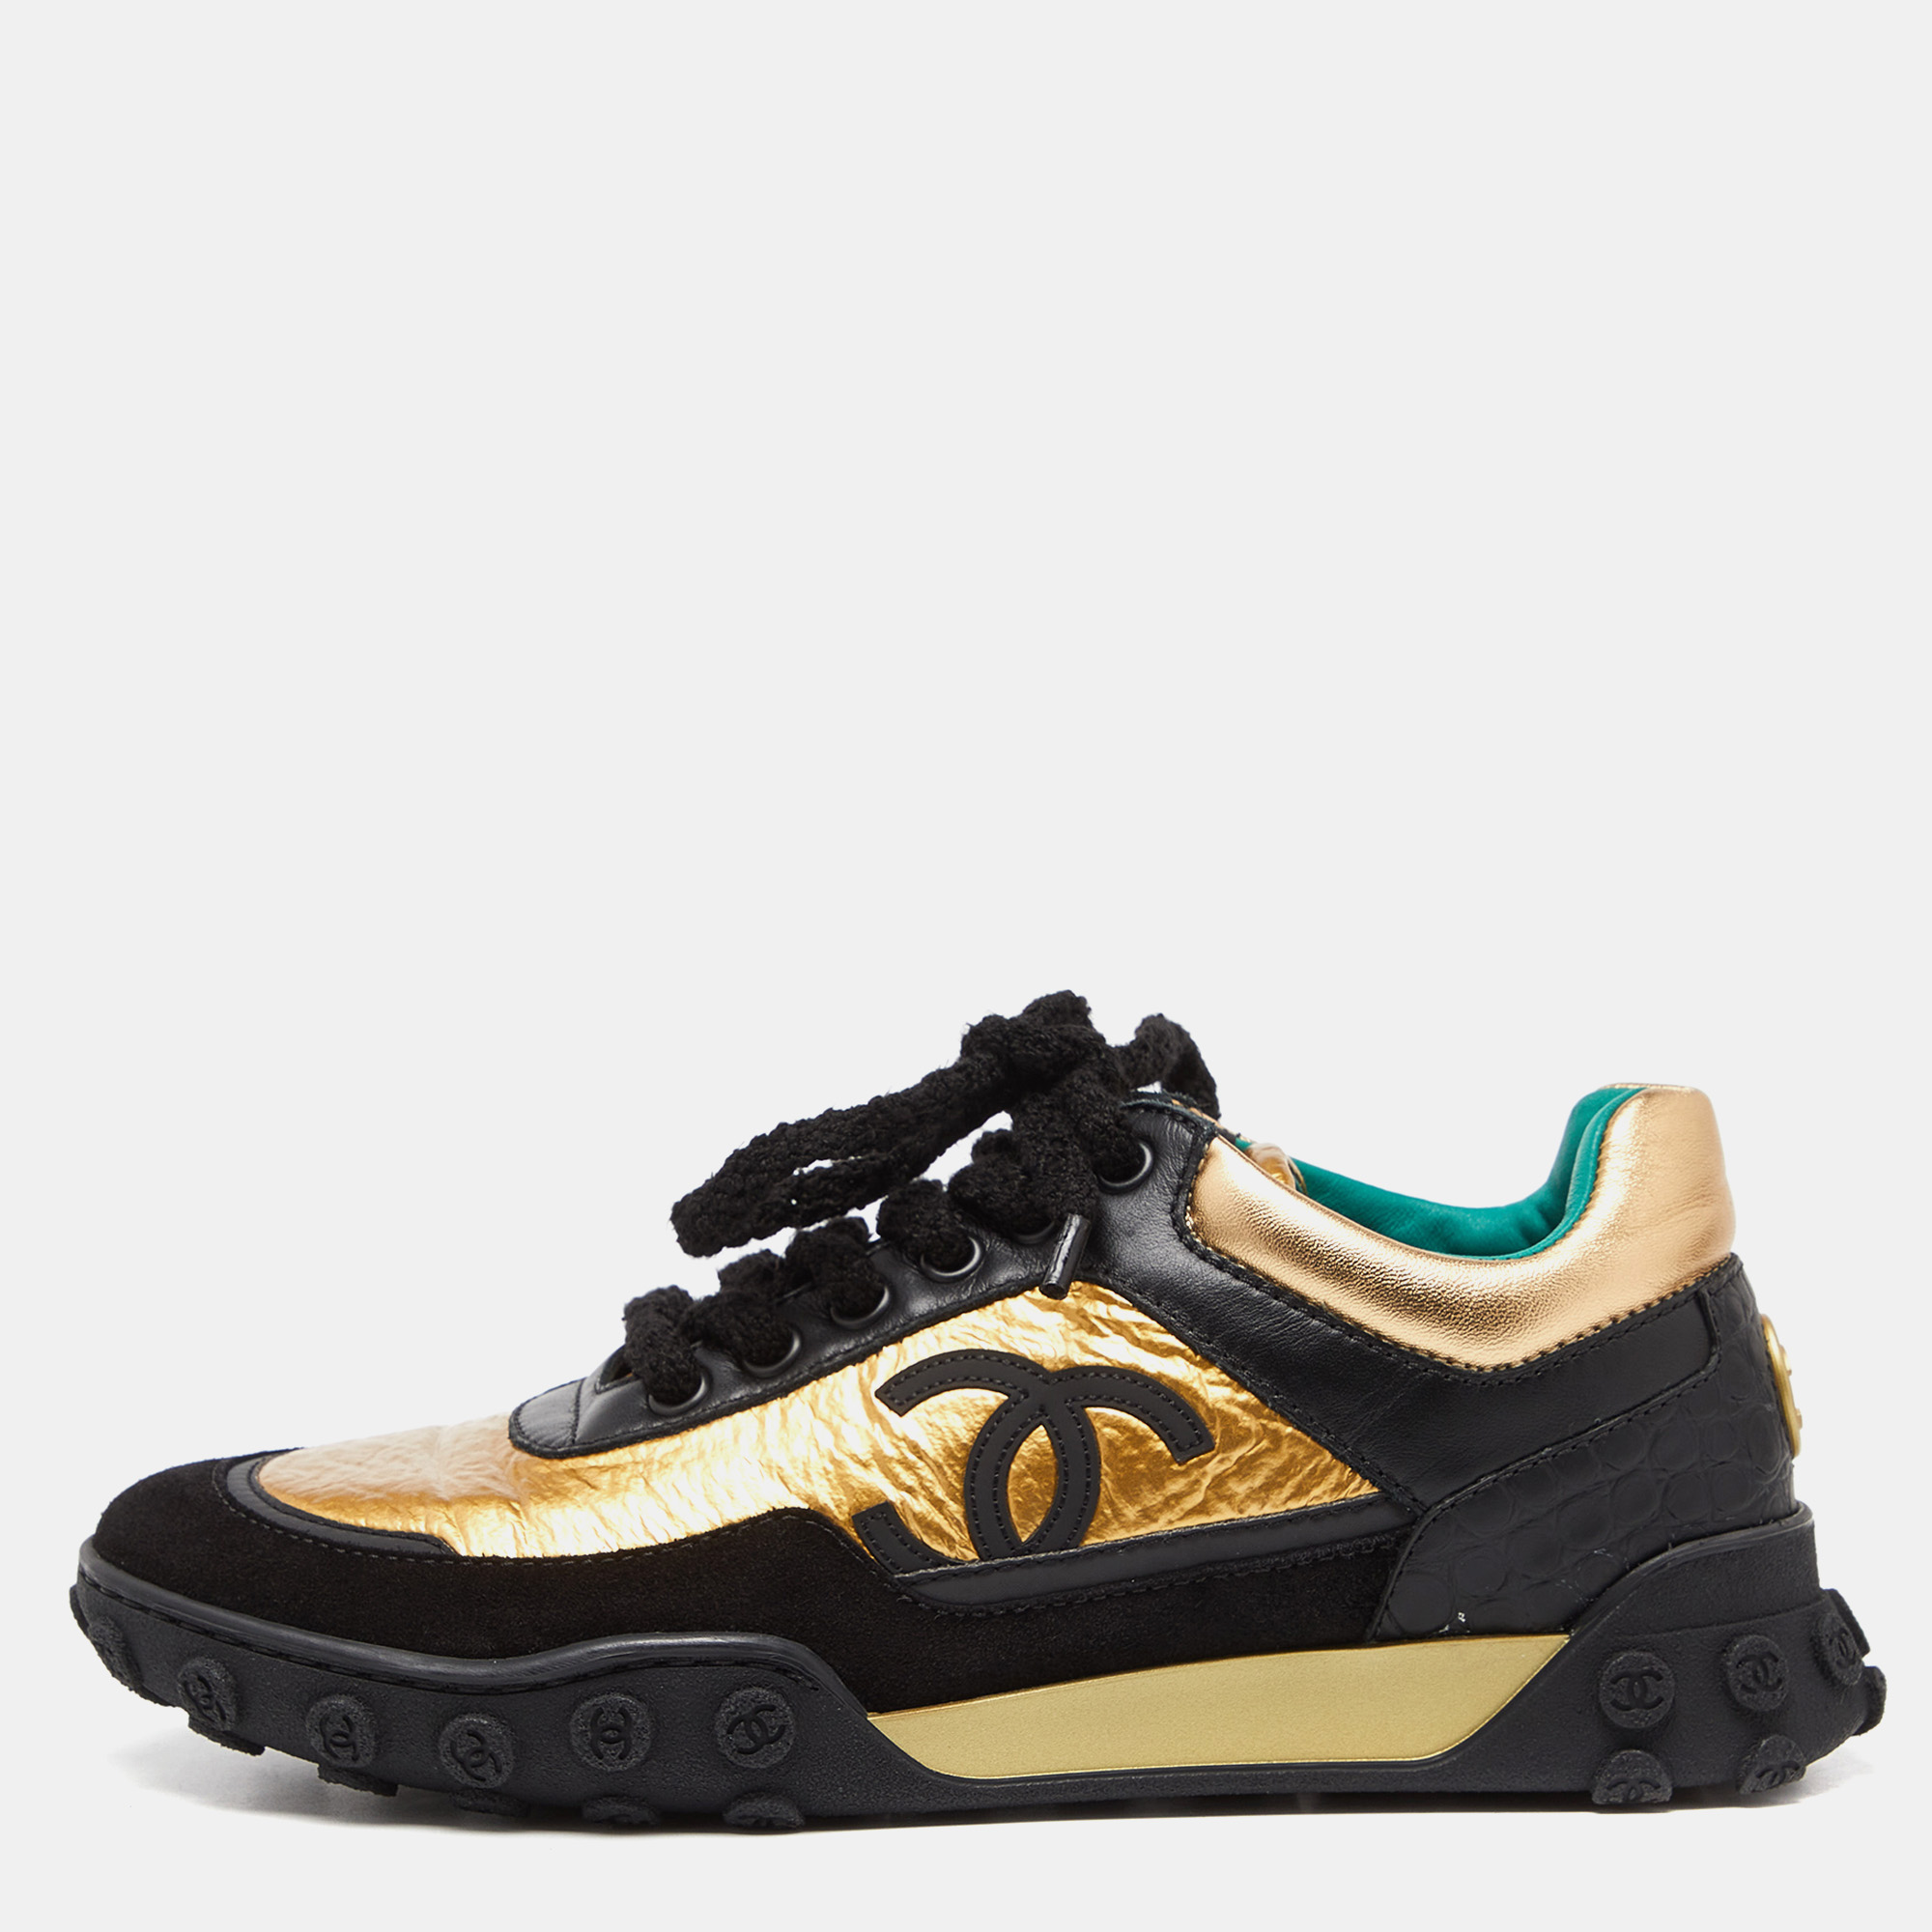 These sneakers from Chanel are amazingly stylish The exterior of the sneakers flaunts a mix of materials and hues while featuring a sturdy silhouette and logo on the counters. They come equipped with comfortable leather lined insoles laced vamps and tough rubber soles.